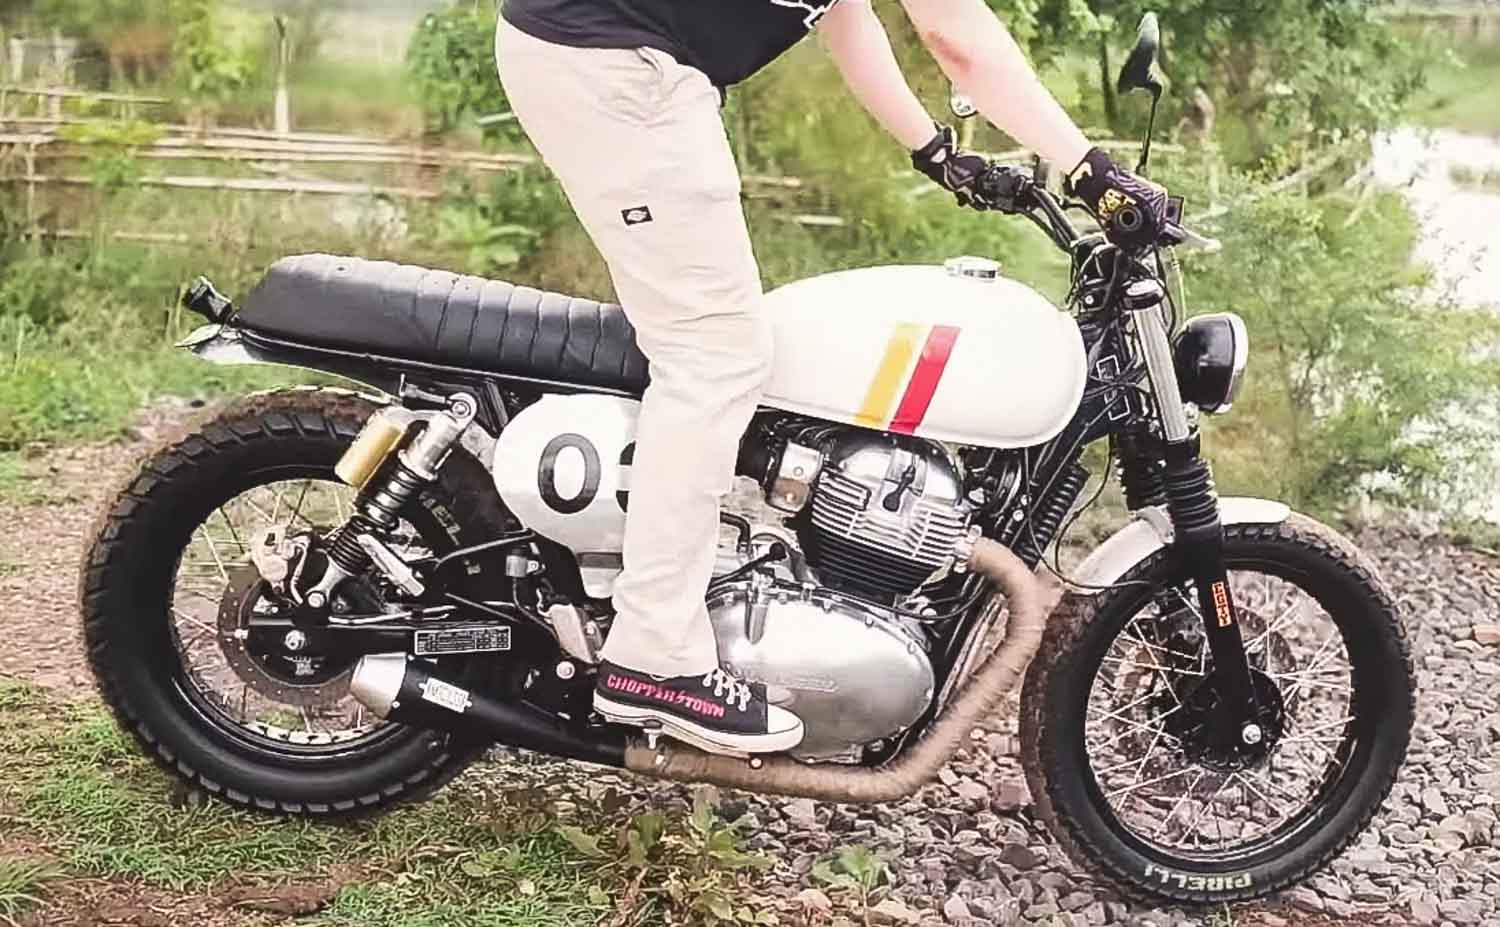 Royal Enfield Interceptor 650 Turned Into A Jaw Dropping Tracker With ...